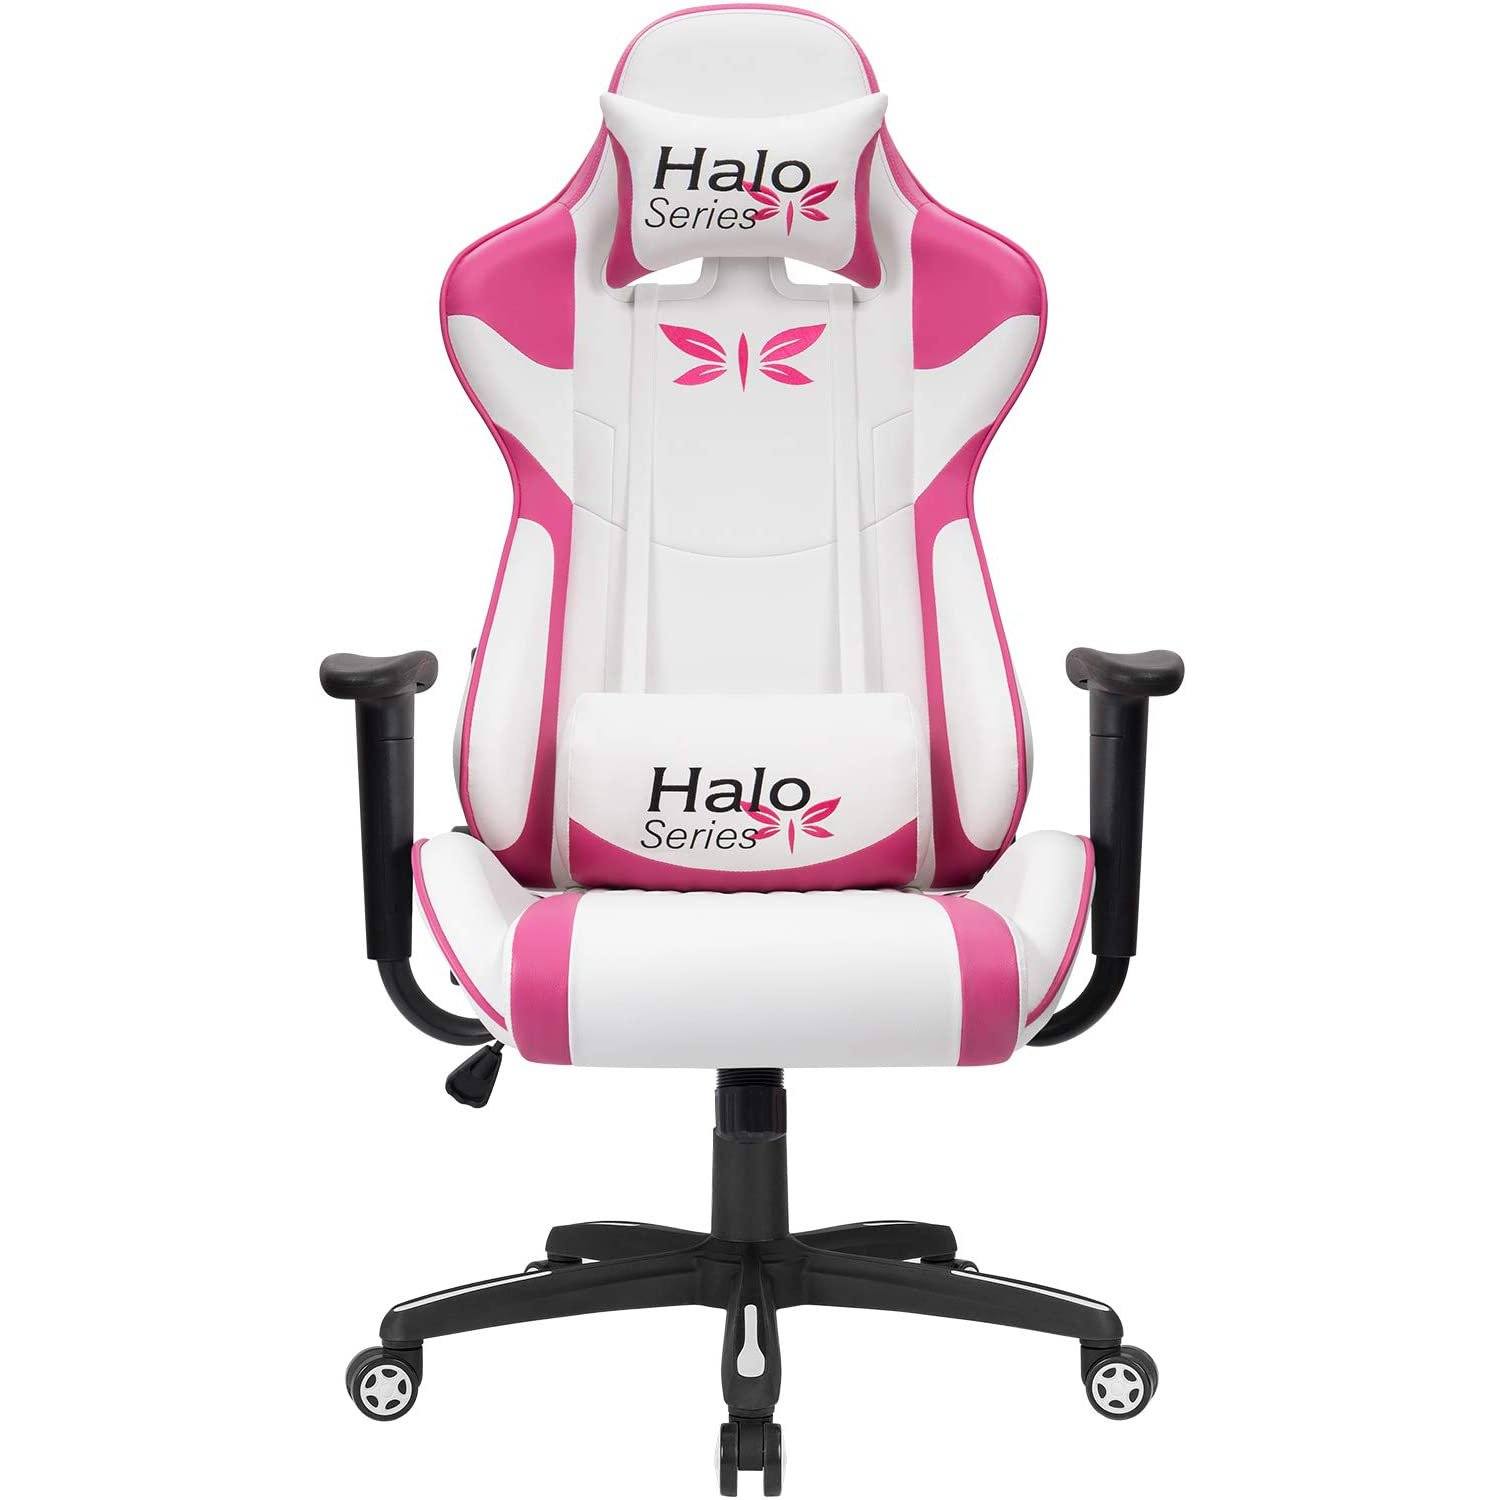 Jummico Gaming Chair Adjustable Racing Chair Halo Series Specialty Des ...